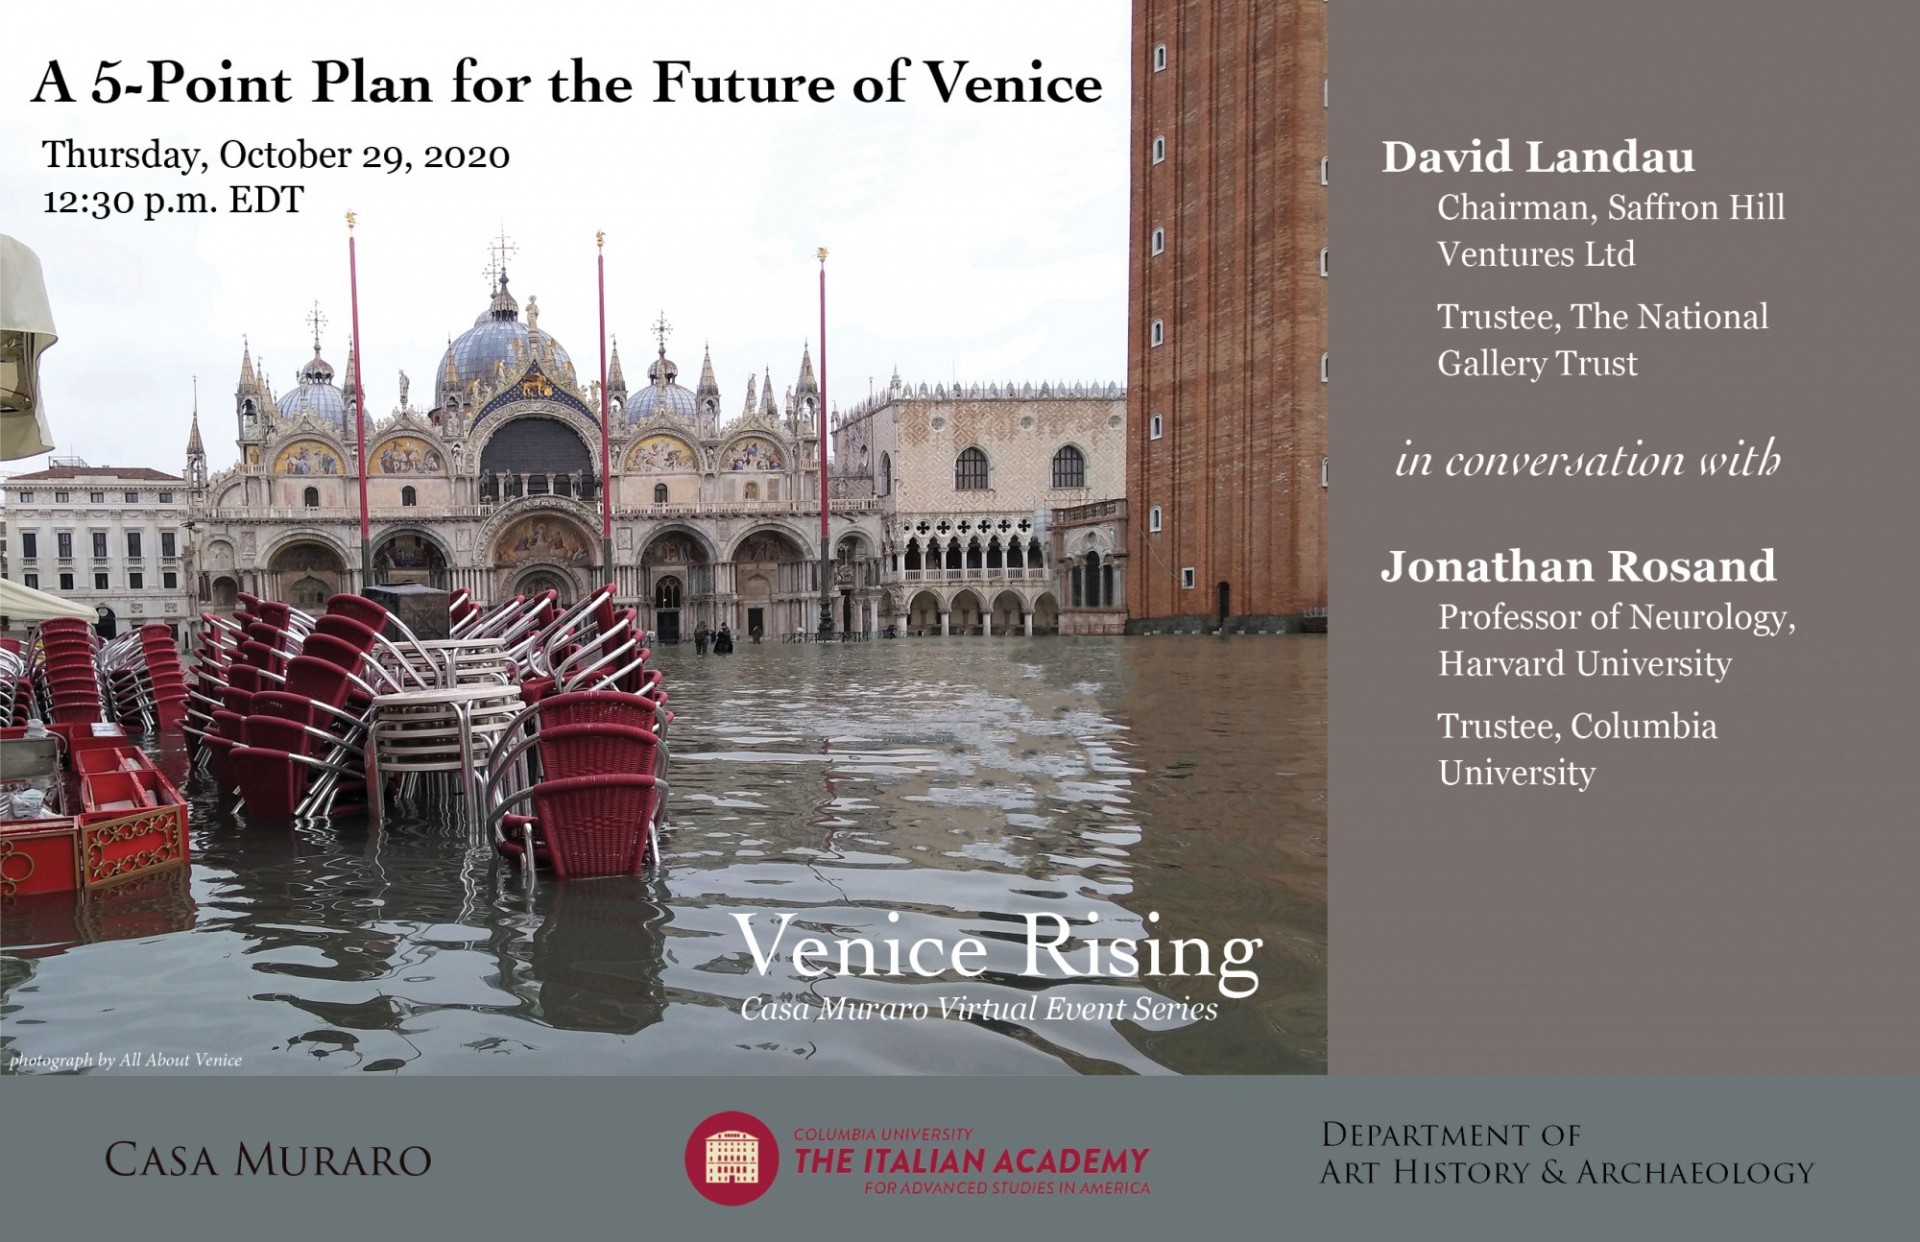 Venice Rising event poster